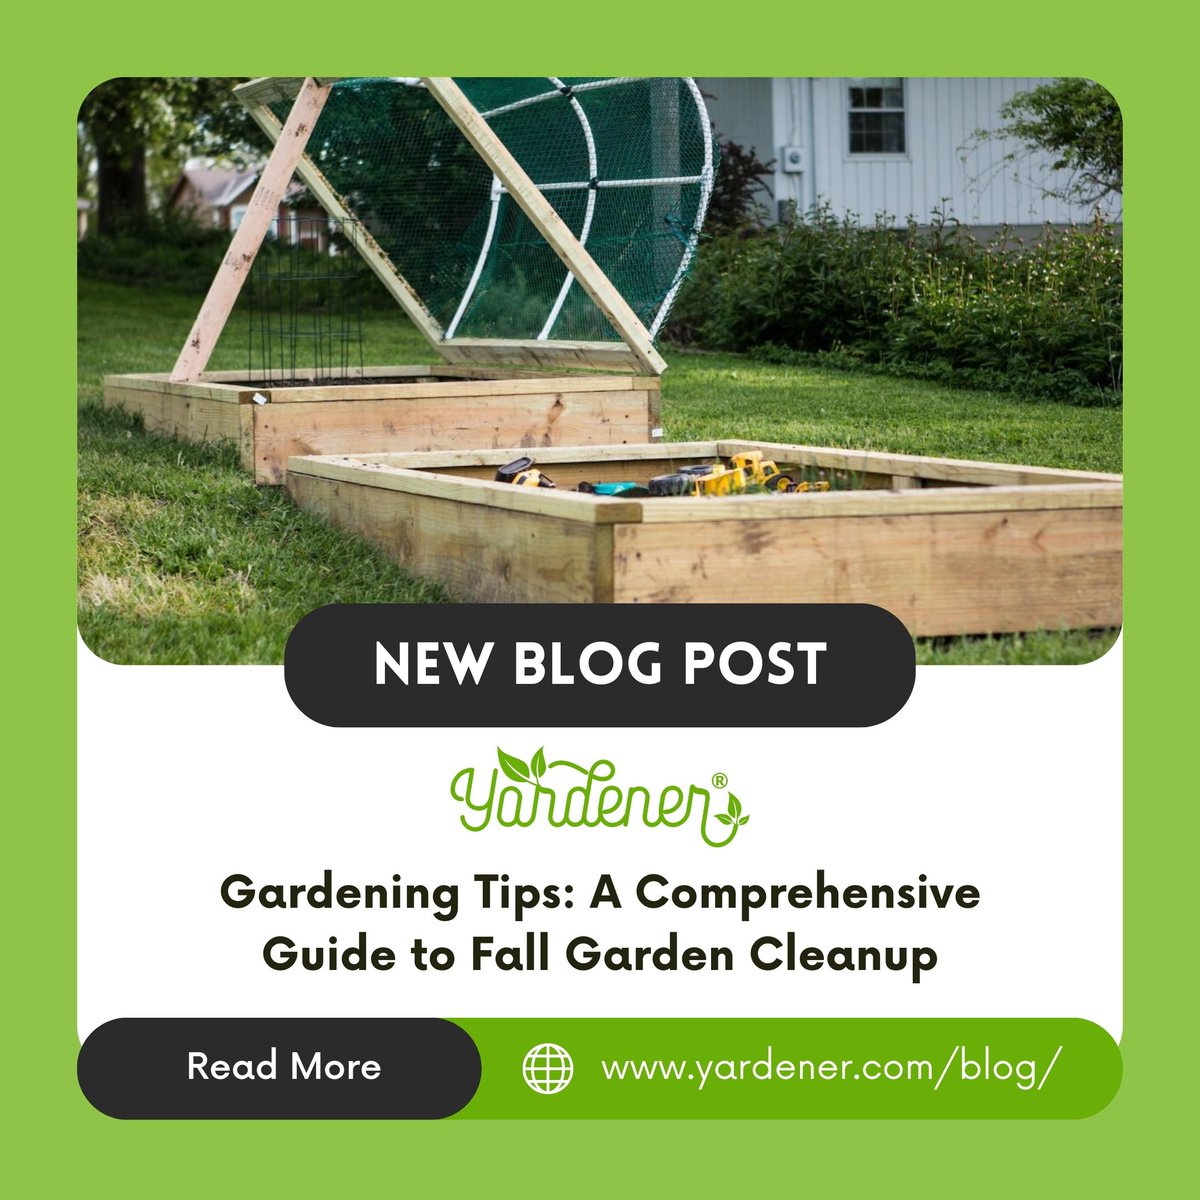 Don't let your garden fall behind! Get a comprehensive guide to pro #gardeningtips and fall cleanup tasks like weeding, composting, crop rotation, and more.

Check it out: s.yardener.com/s/amwpt

#fallgardening #gardeningtips #GardeningX #gardening #gardenblog